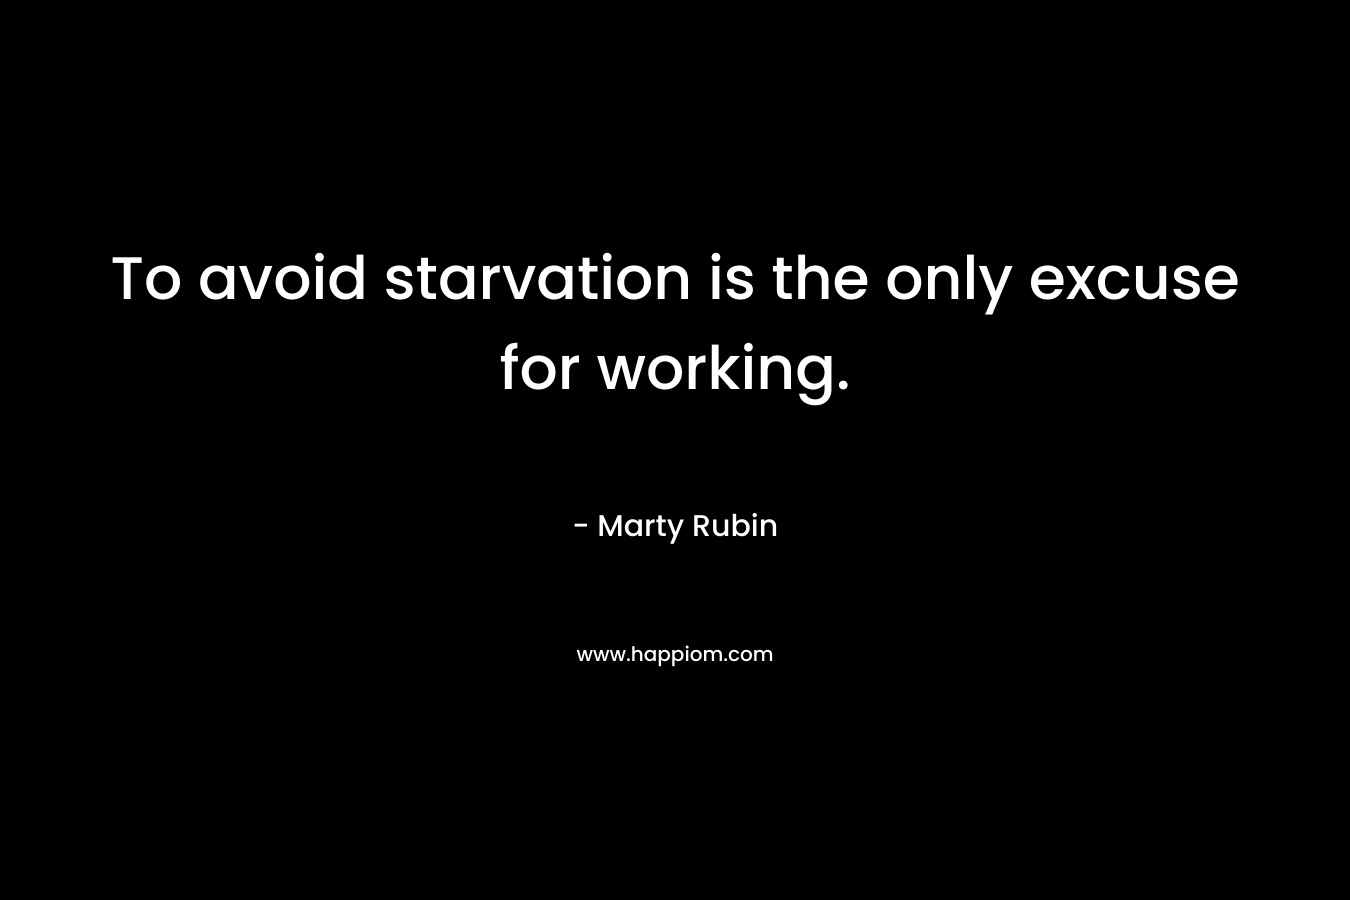 To avoid starvation is the only excuse for working. – Marty Rubin